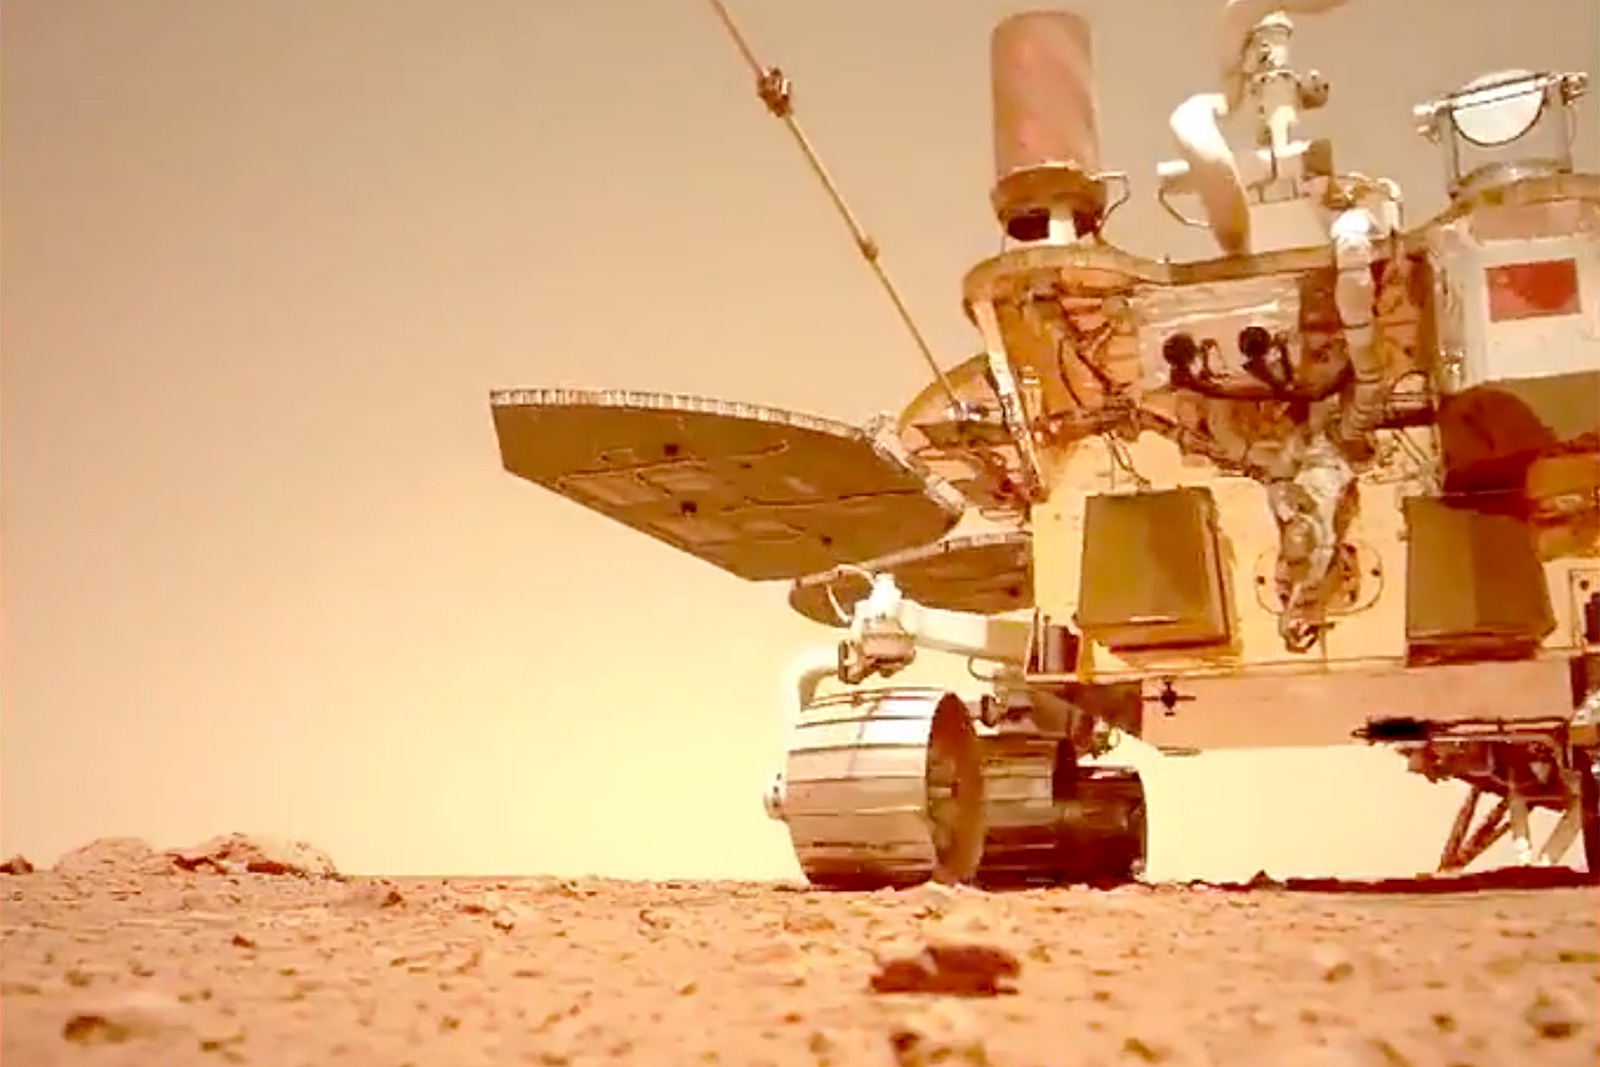 China shares video and audio from its Mars rover